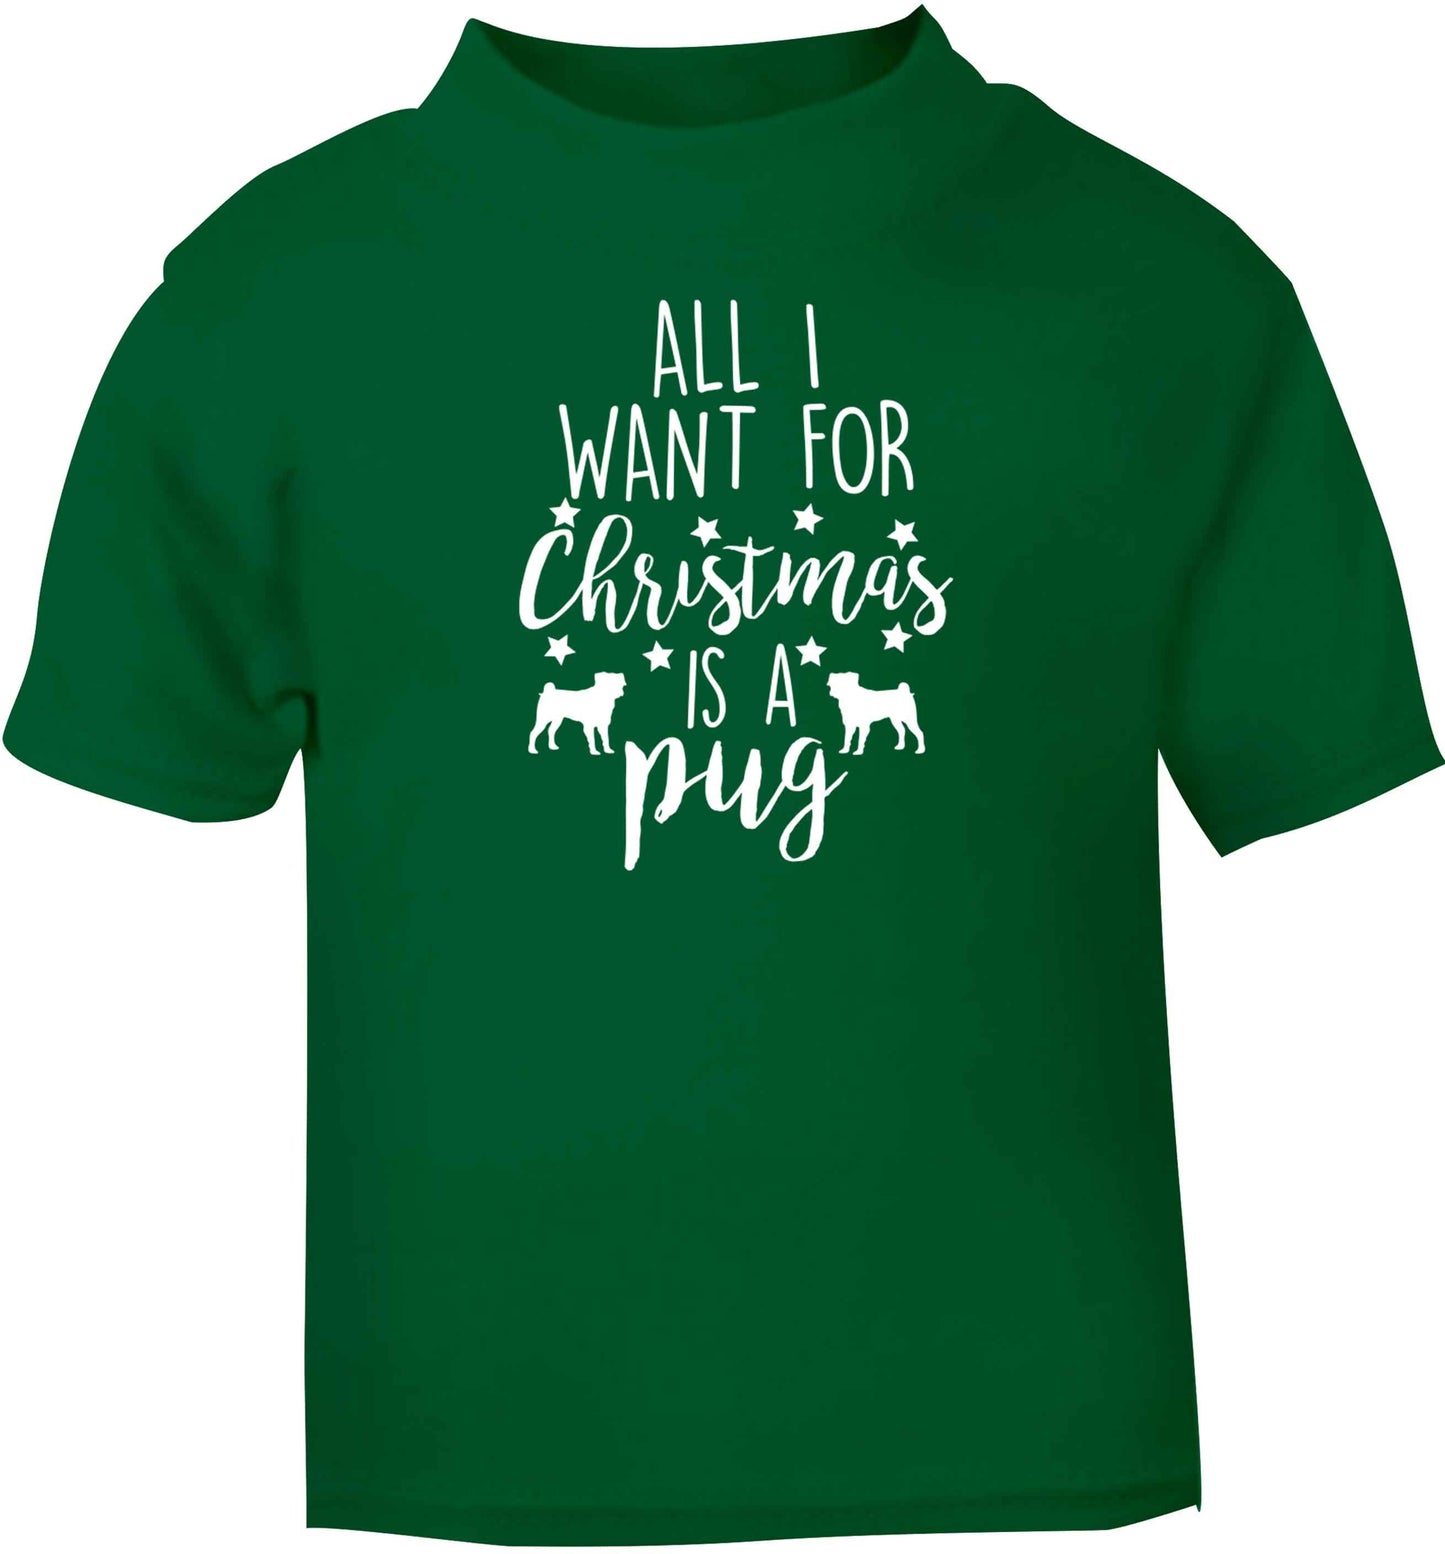 All I want for Christmas is a pug green baby toddler Tshirt 2 Years